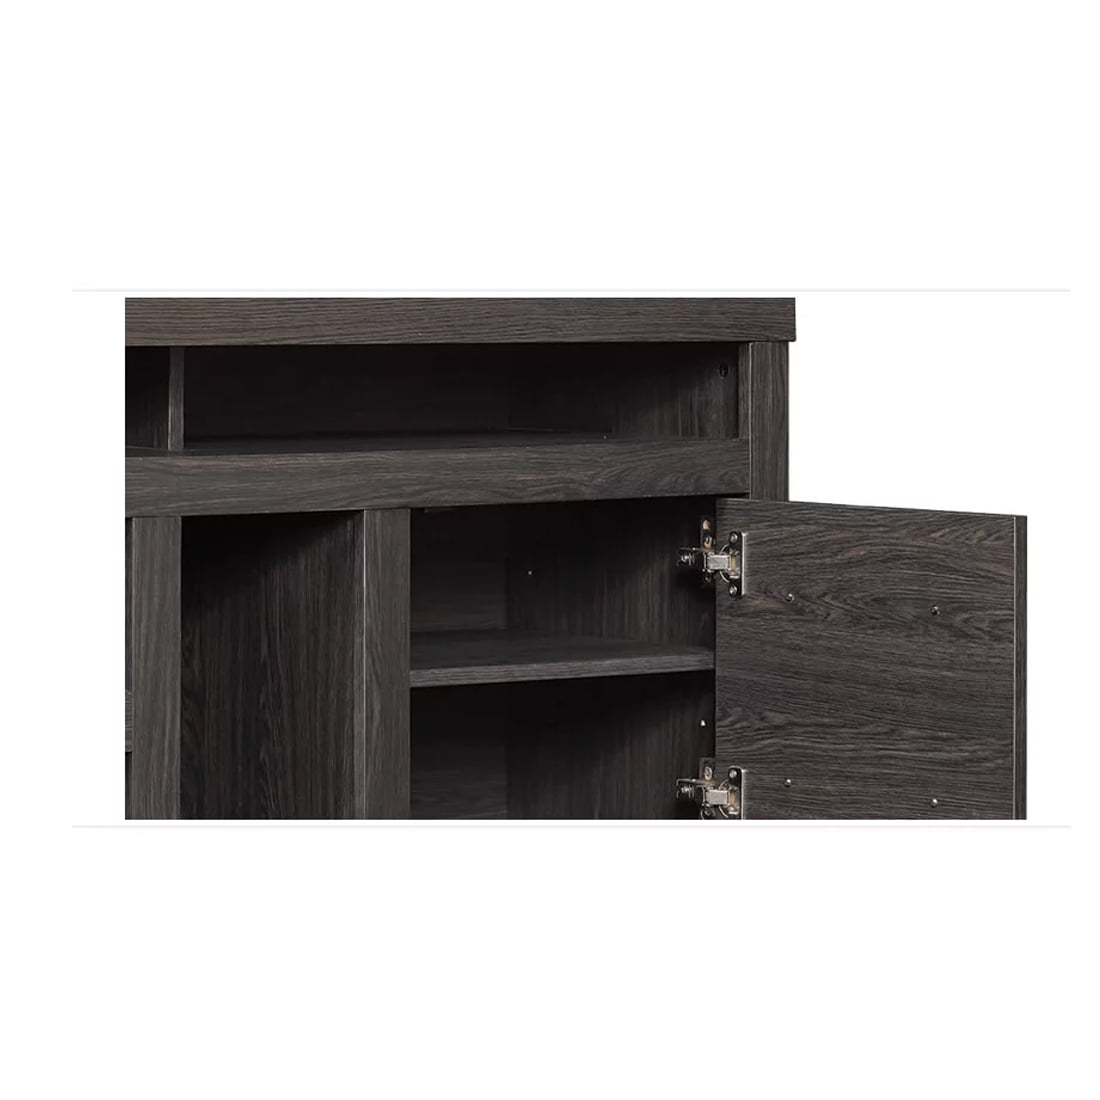 Bell'O ARCOLA Black Walnut for flat screen TVs up to 55”